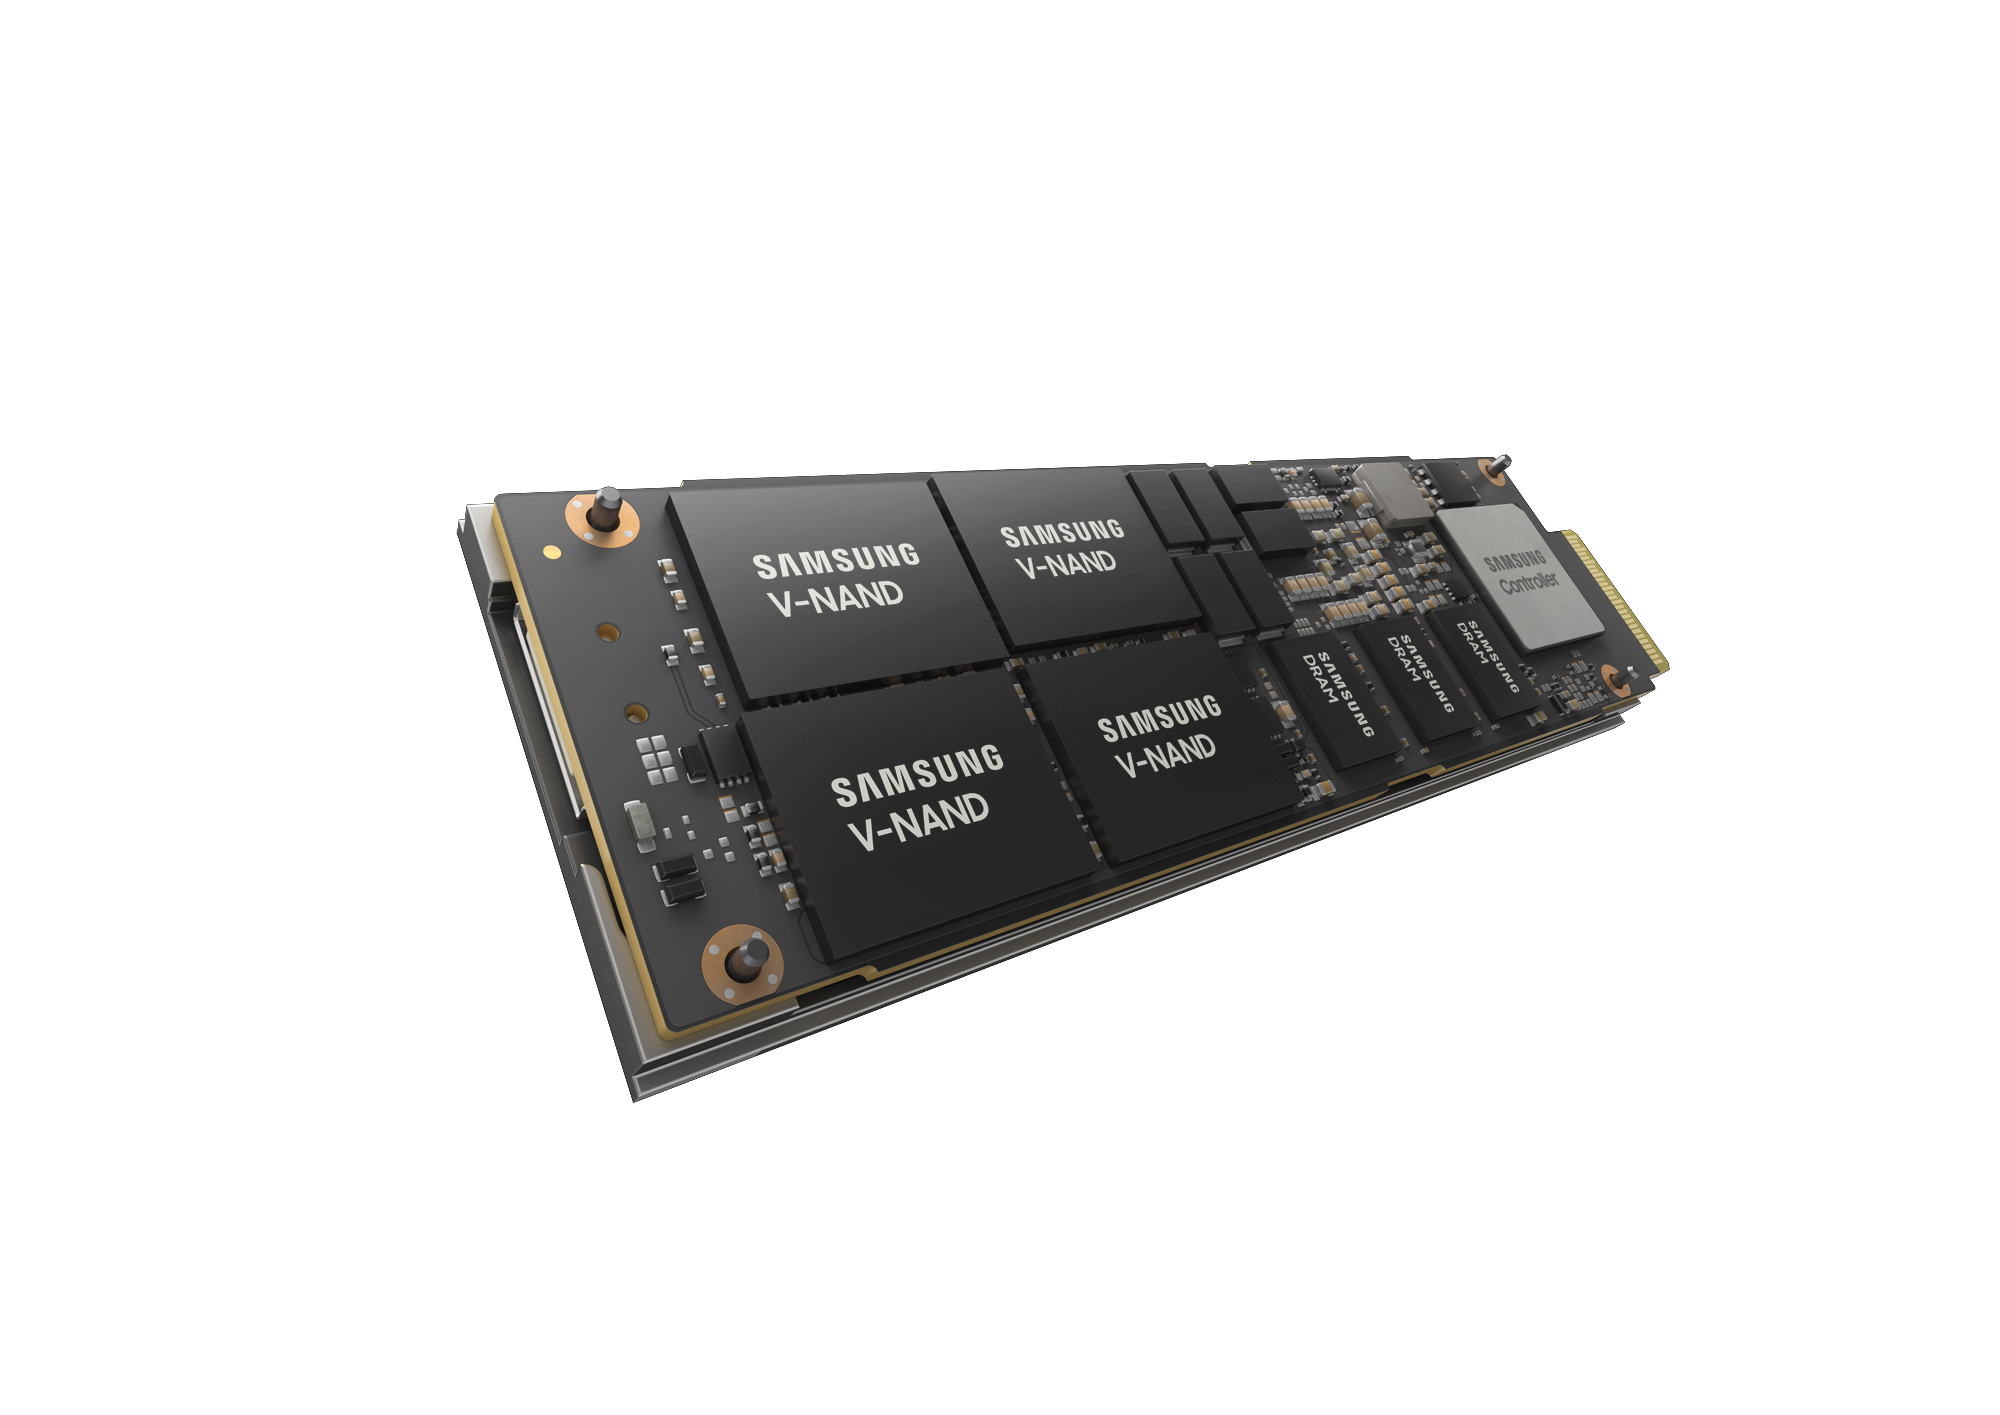 The Samsung PM9A3 NVMe SSD